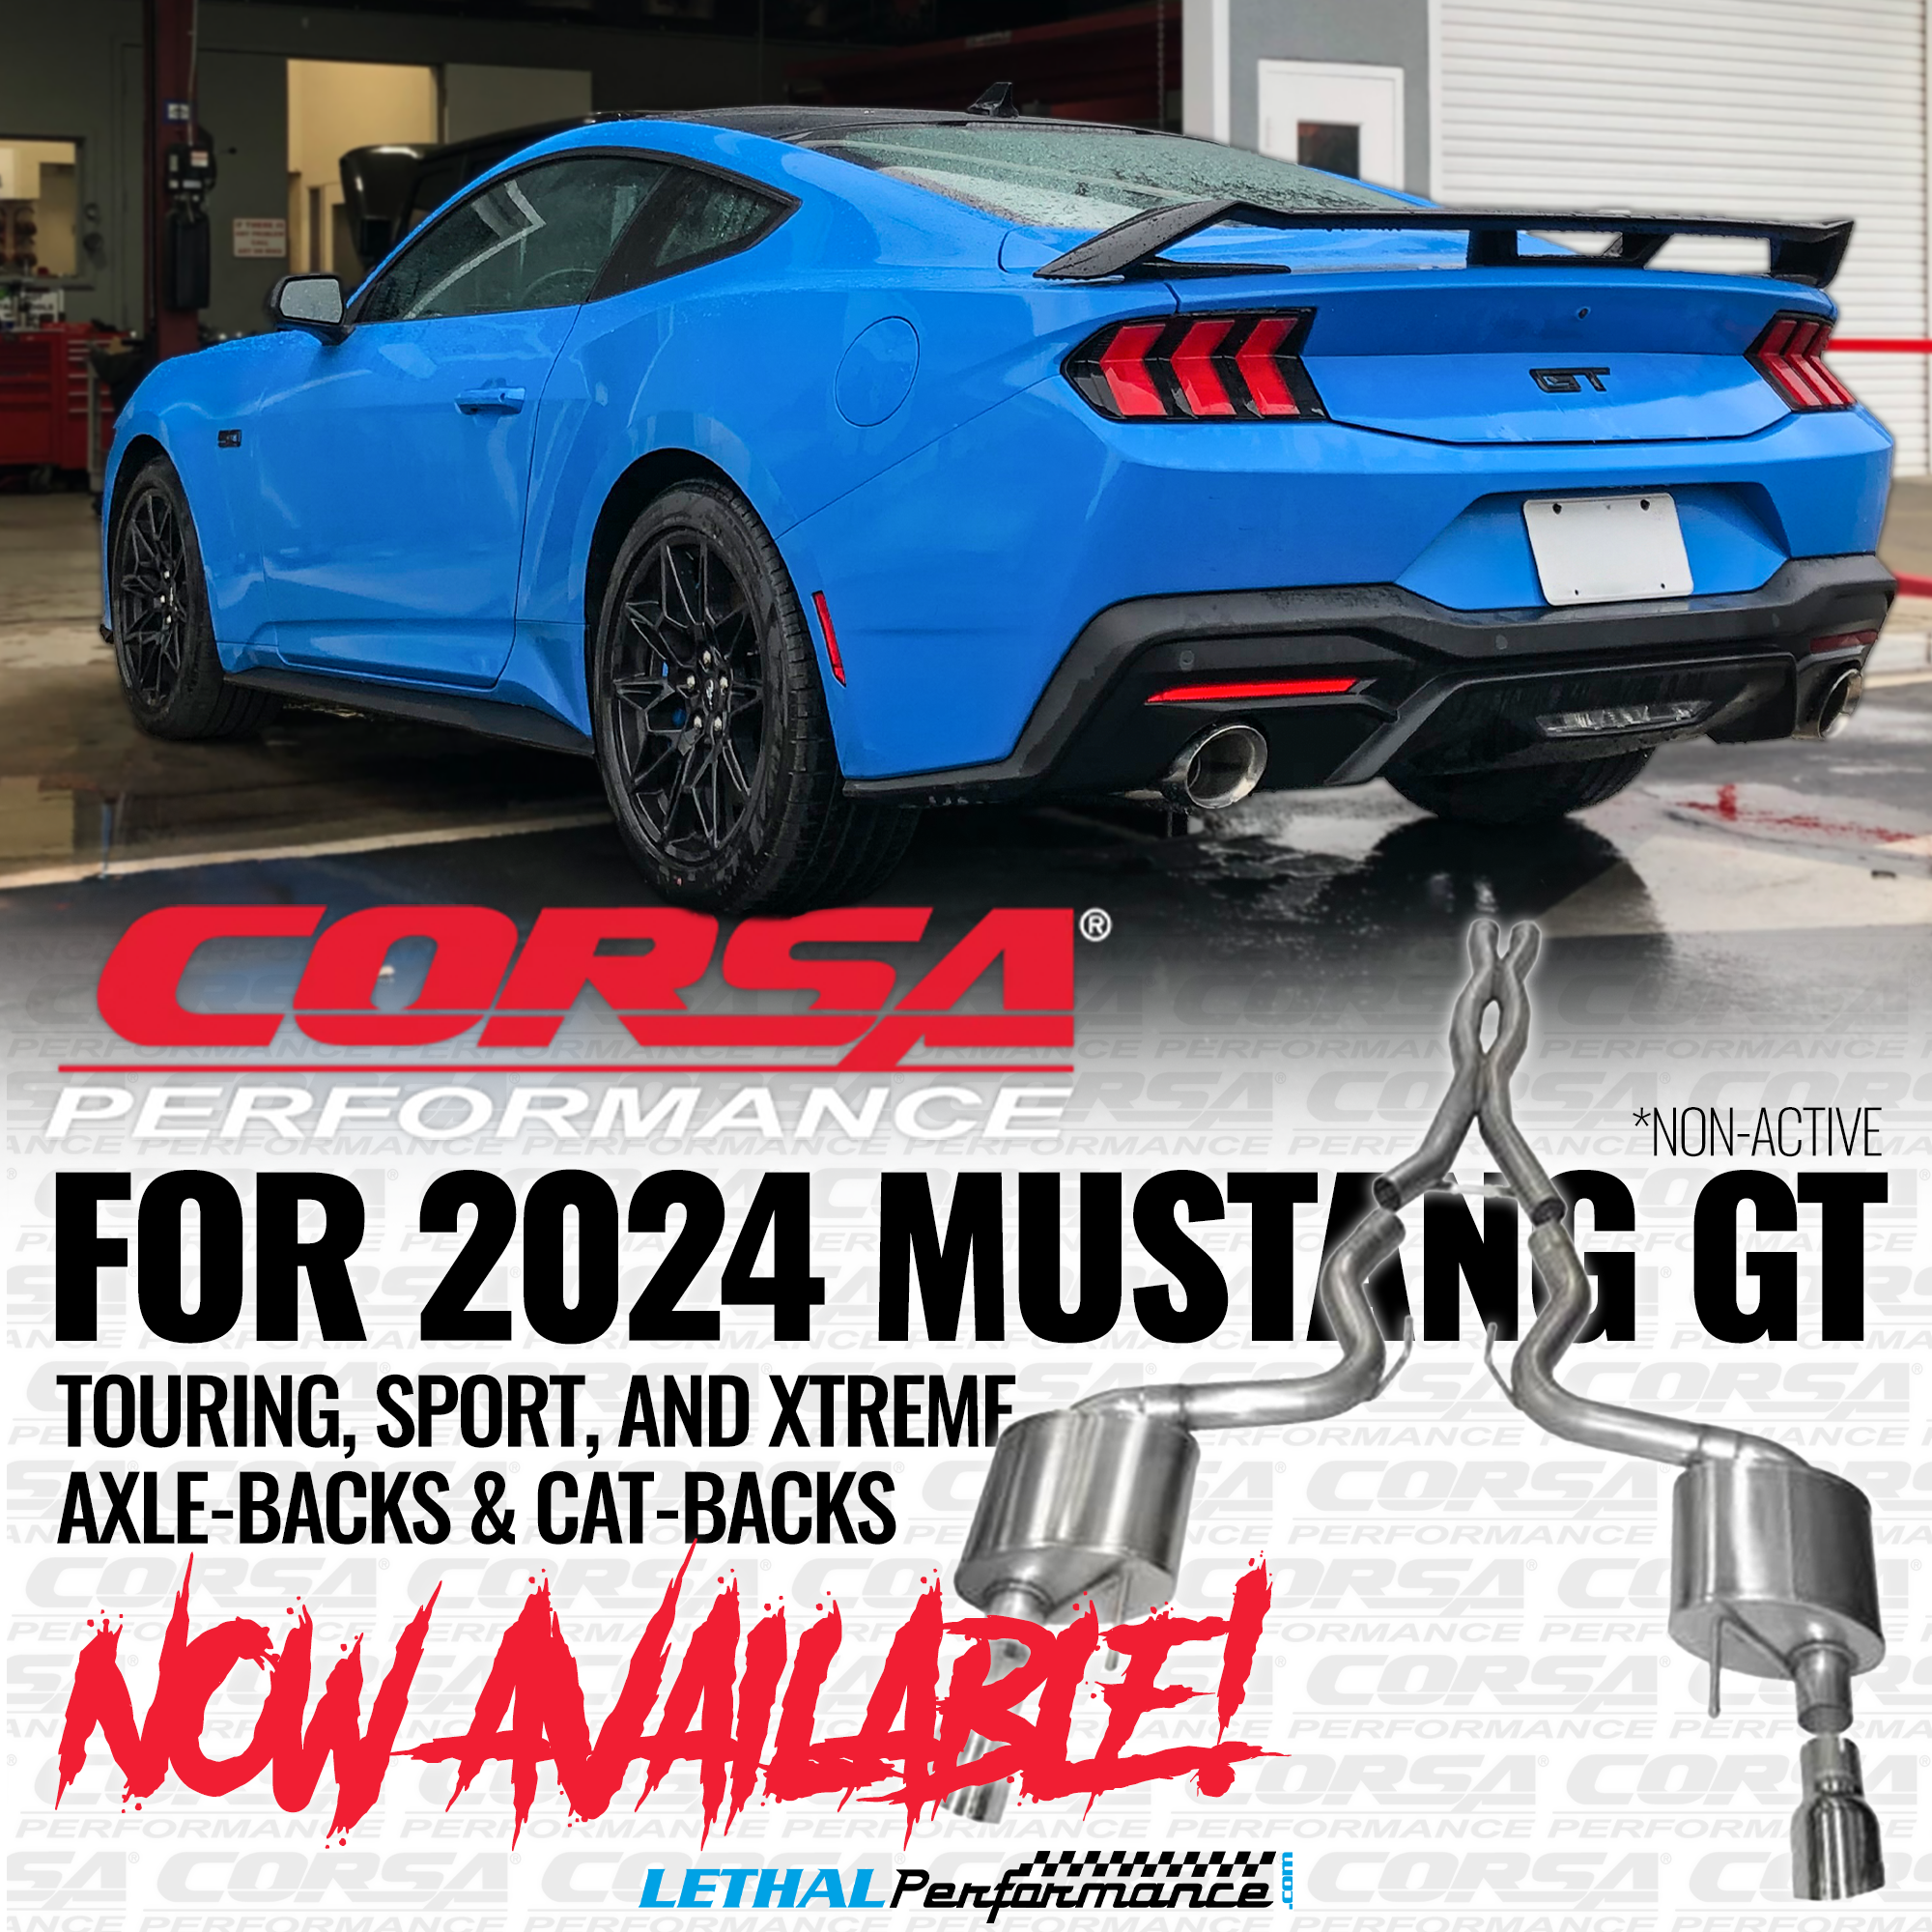 S650 Mustang Non-active exhaust recommendations? corsa 2024 